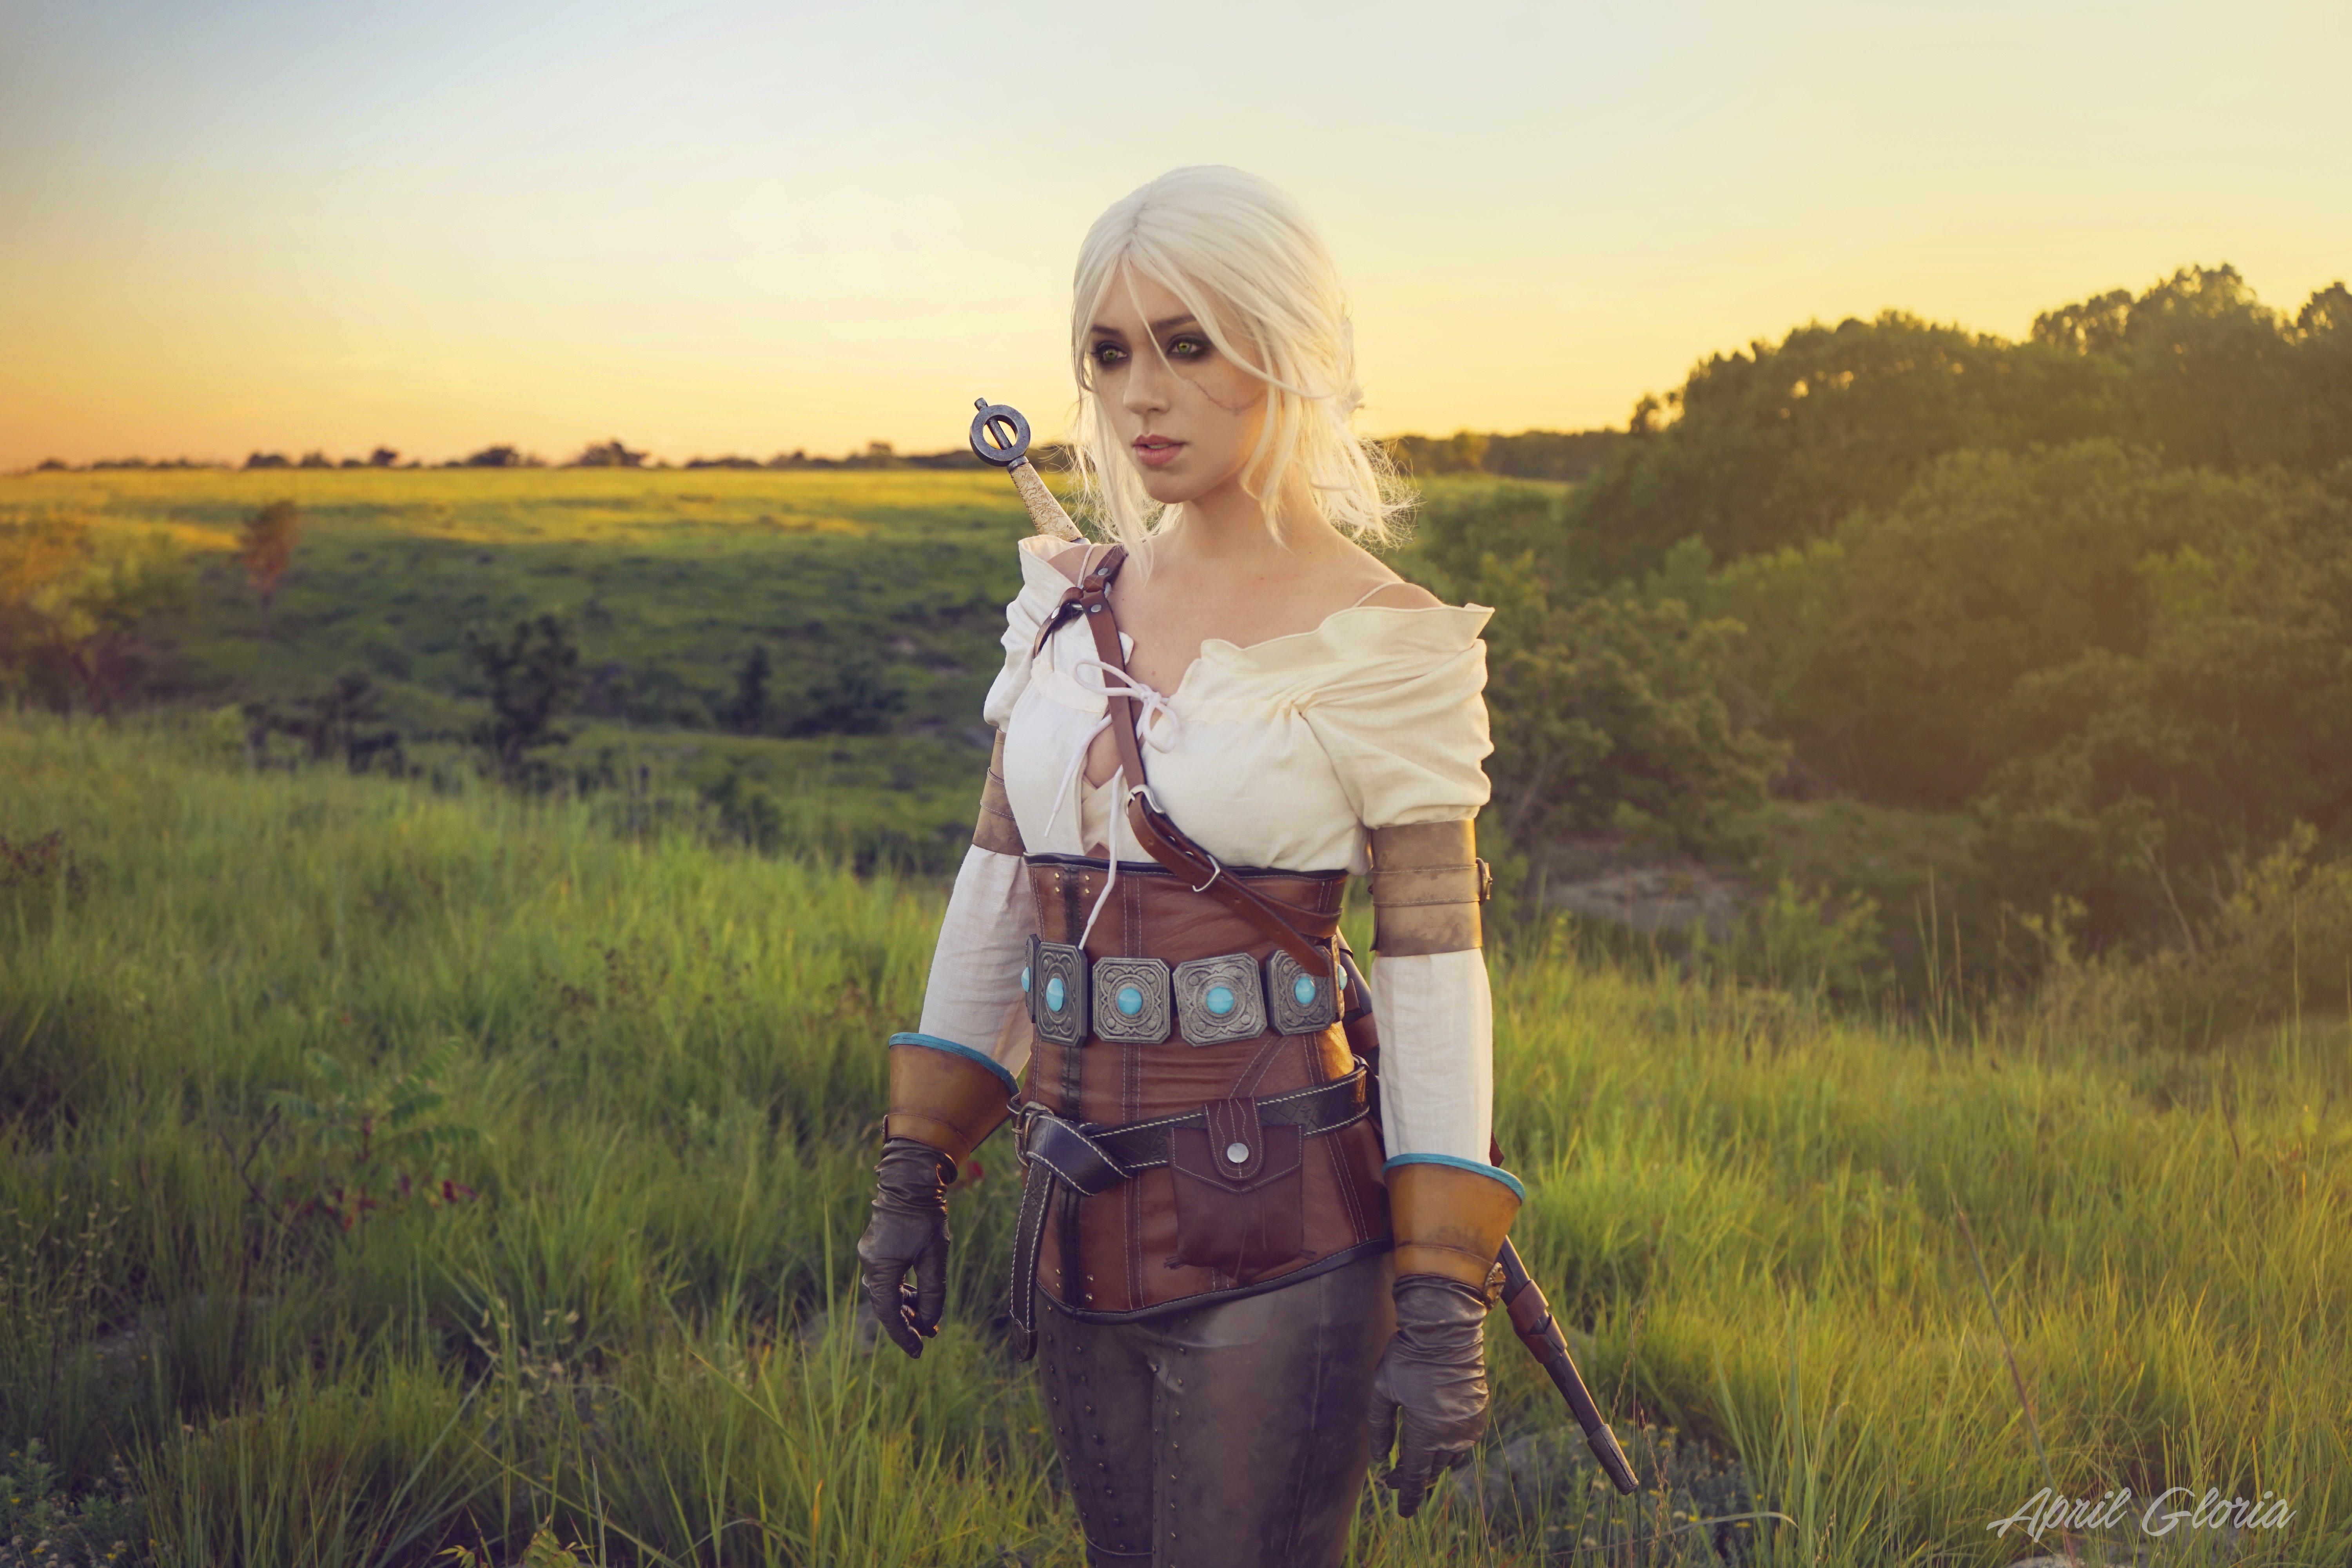 Wallpaper Girl in Ciris cosplay from The Witcher